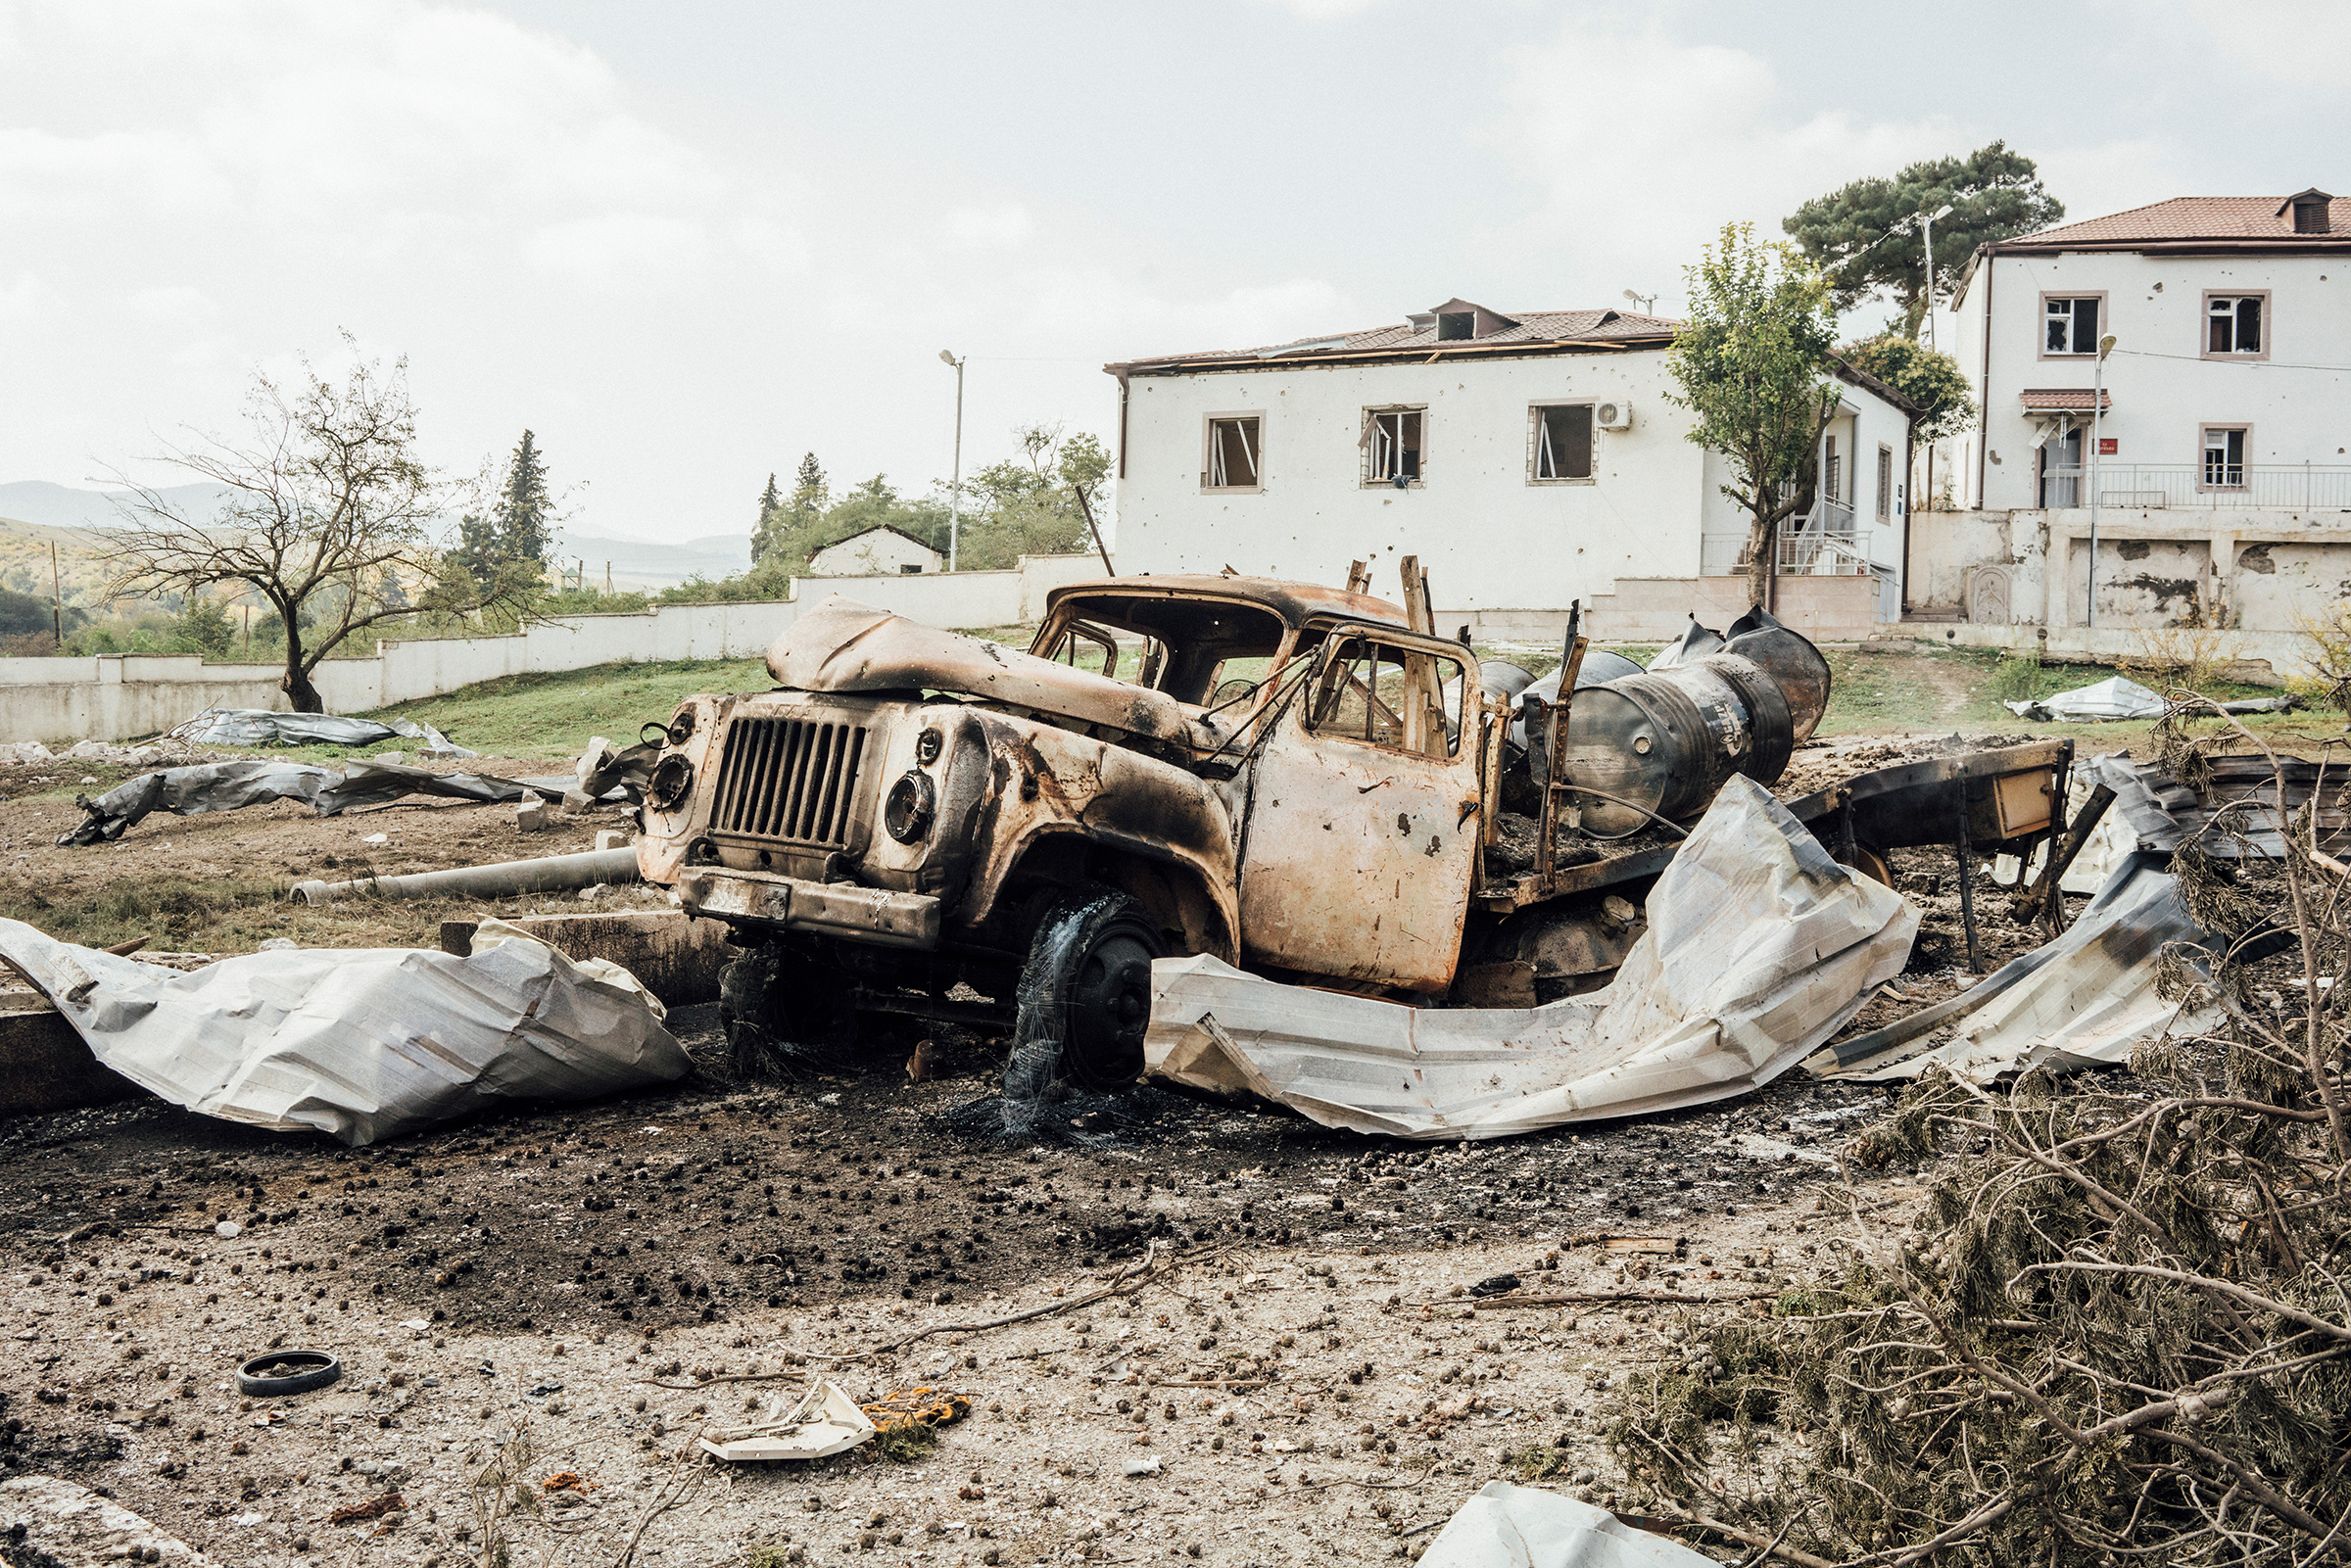 A vehicle destroyed by shelling in the town of Martakert.